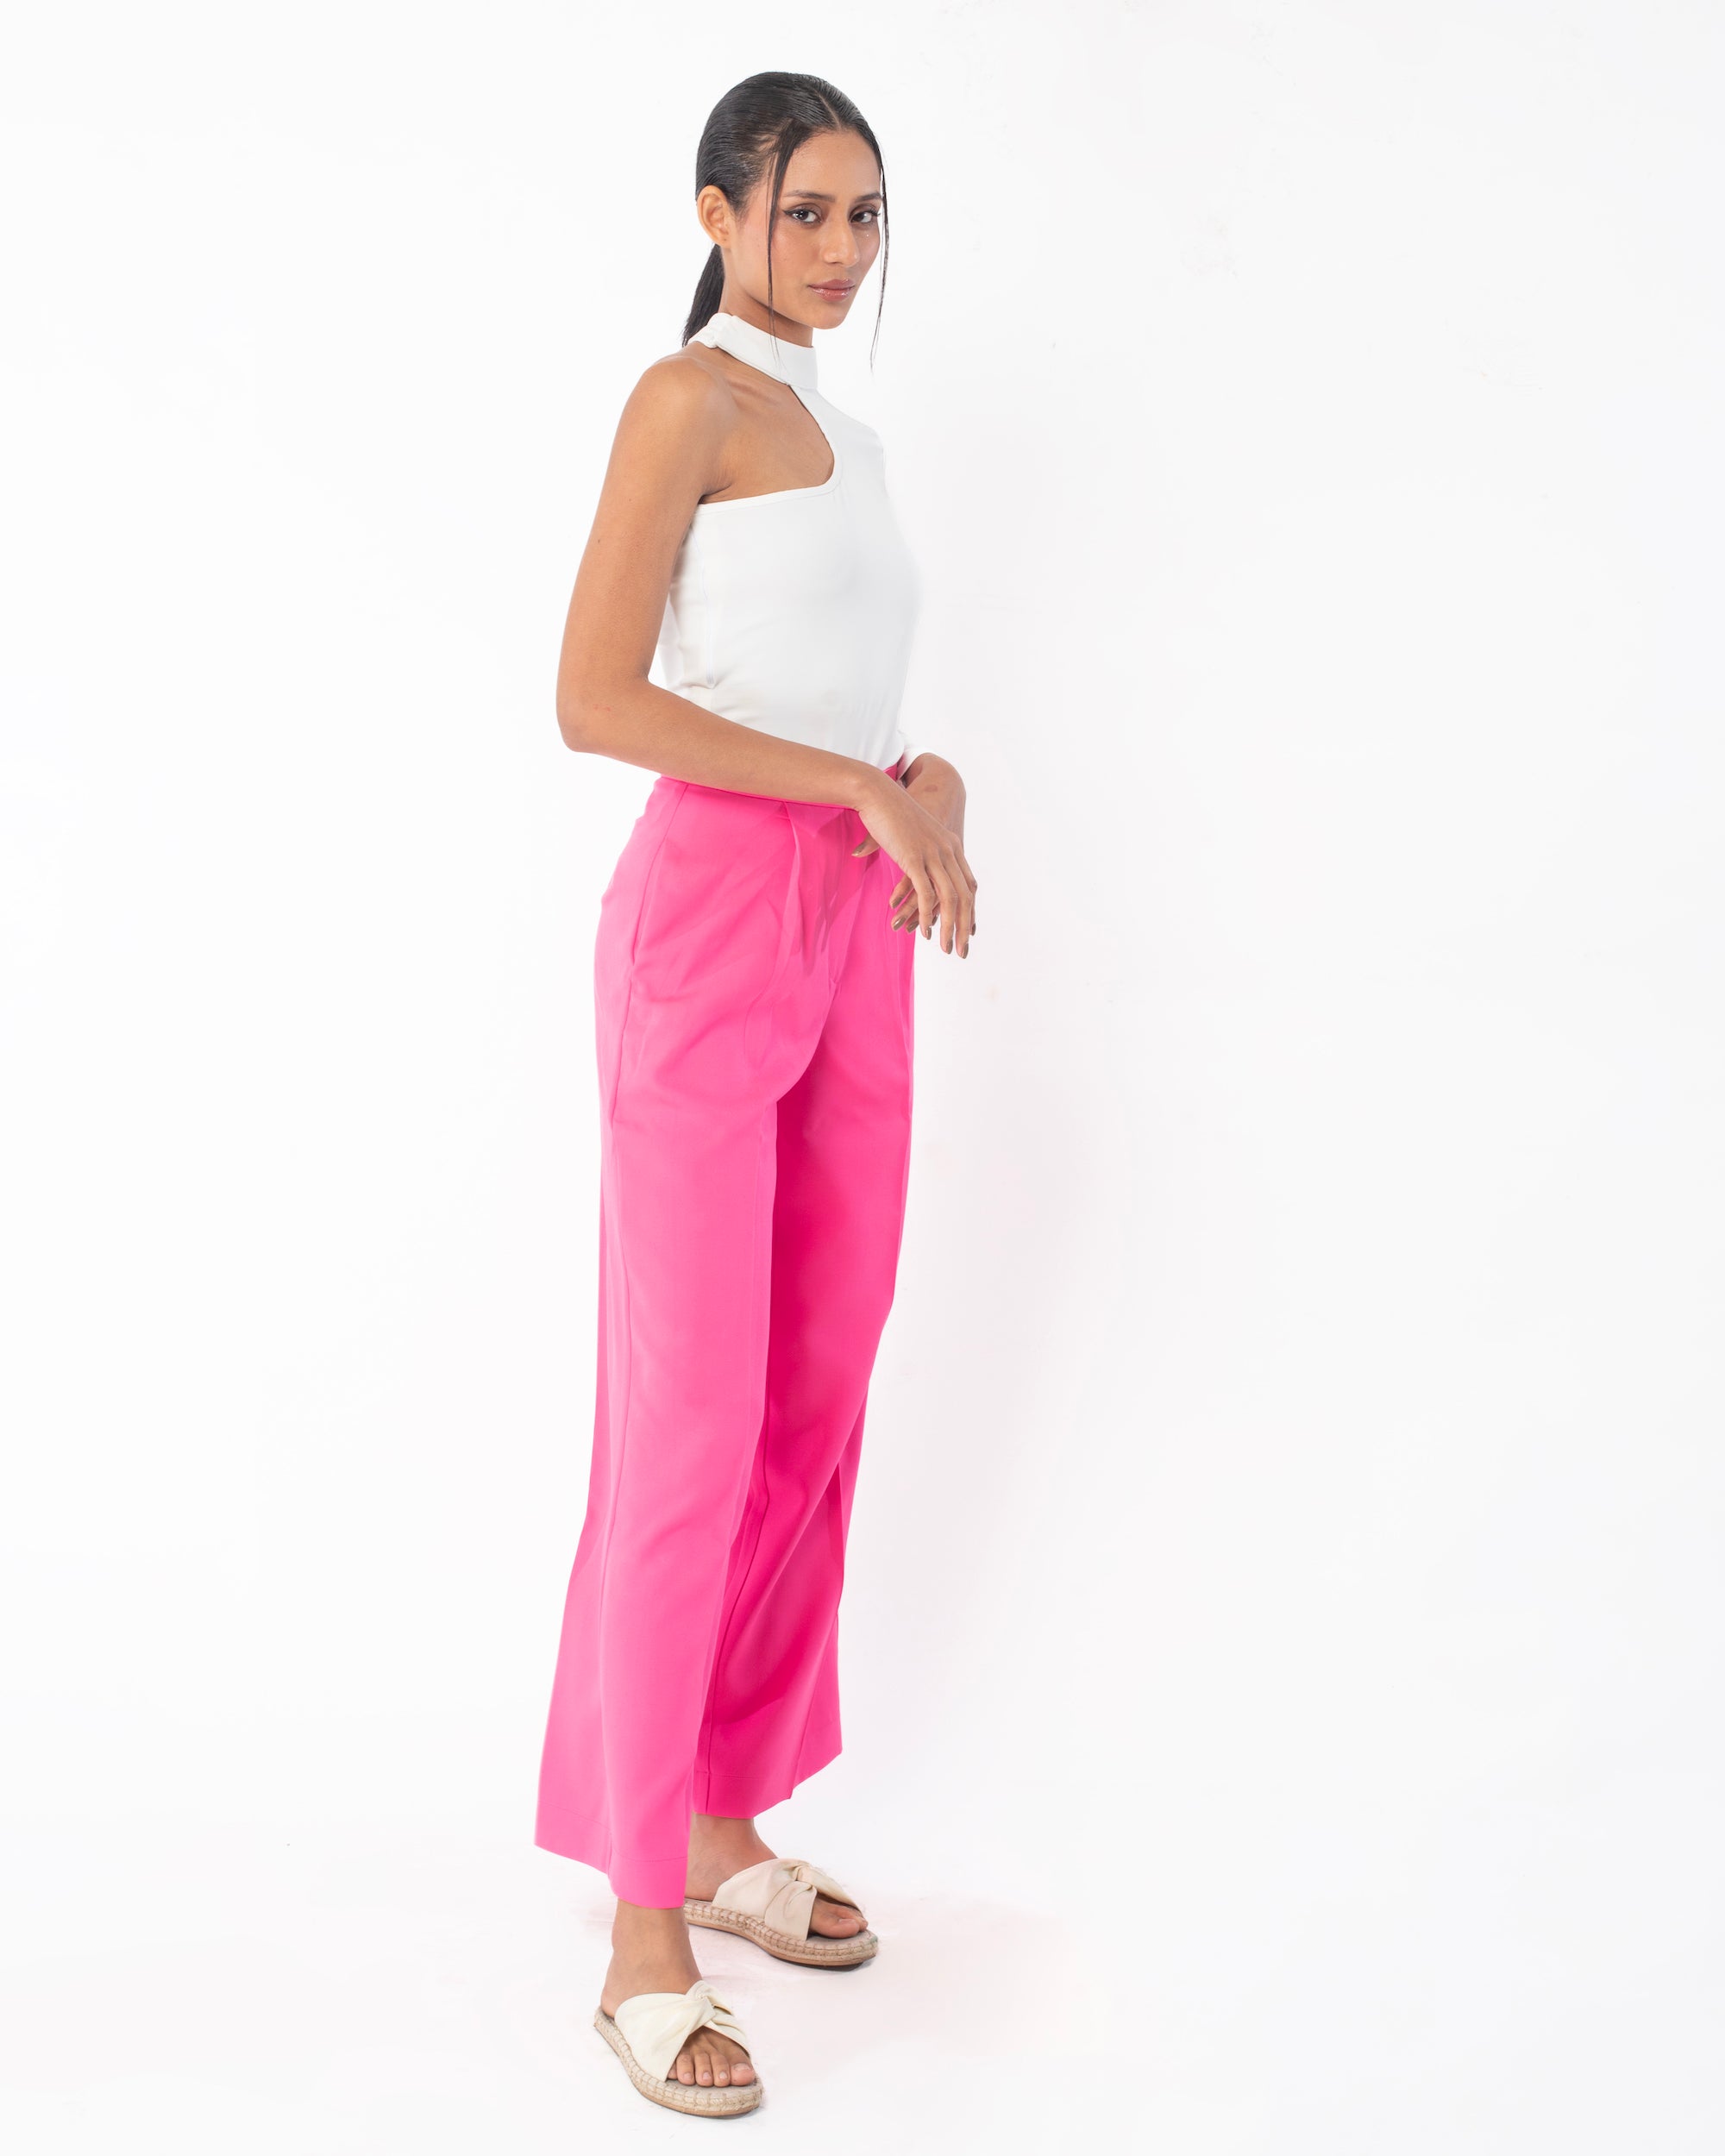 Neon pink pants with classic white bodysuit